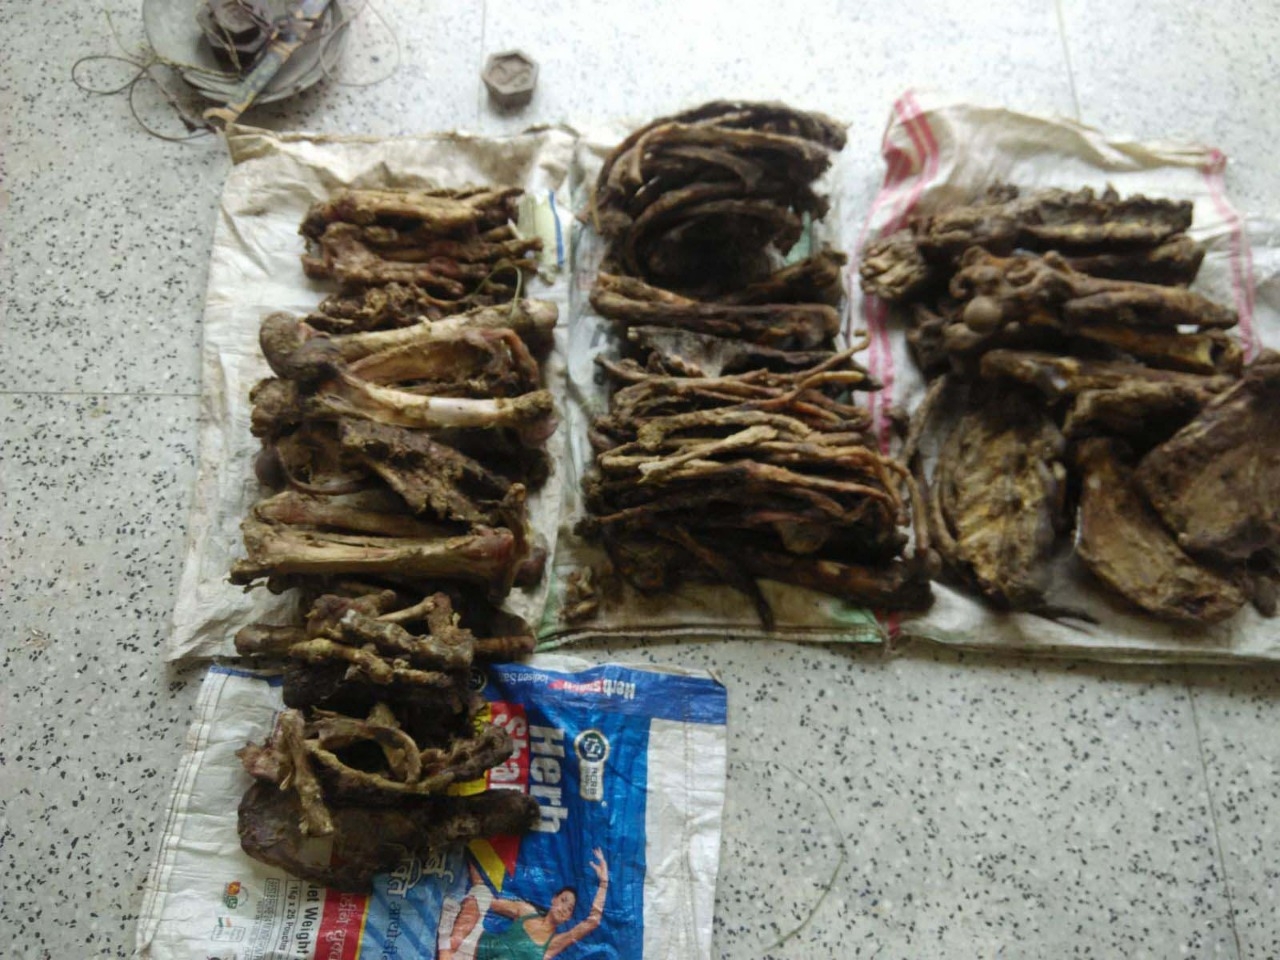 Tiger bones and other parts, destined to cross the border were tracked by Wildlife Protection Society of India (WPSI), poached from Valmiki Tiger Reserve, Bihar. The forest has roughly 17 to 22 Tigers as of 2014, of which multiple cases of poaching had been reported with four in 2016 alone. by .